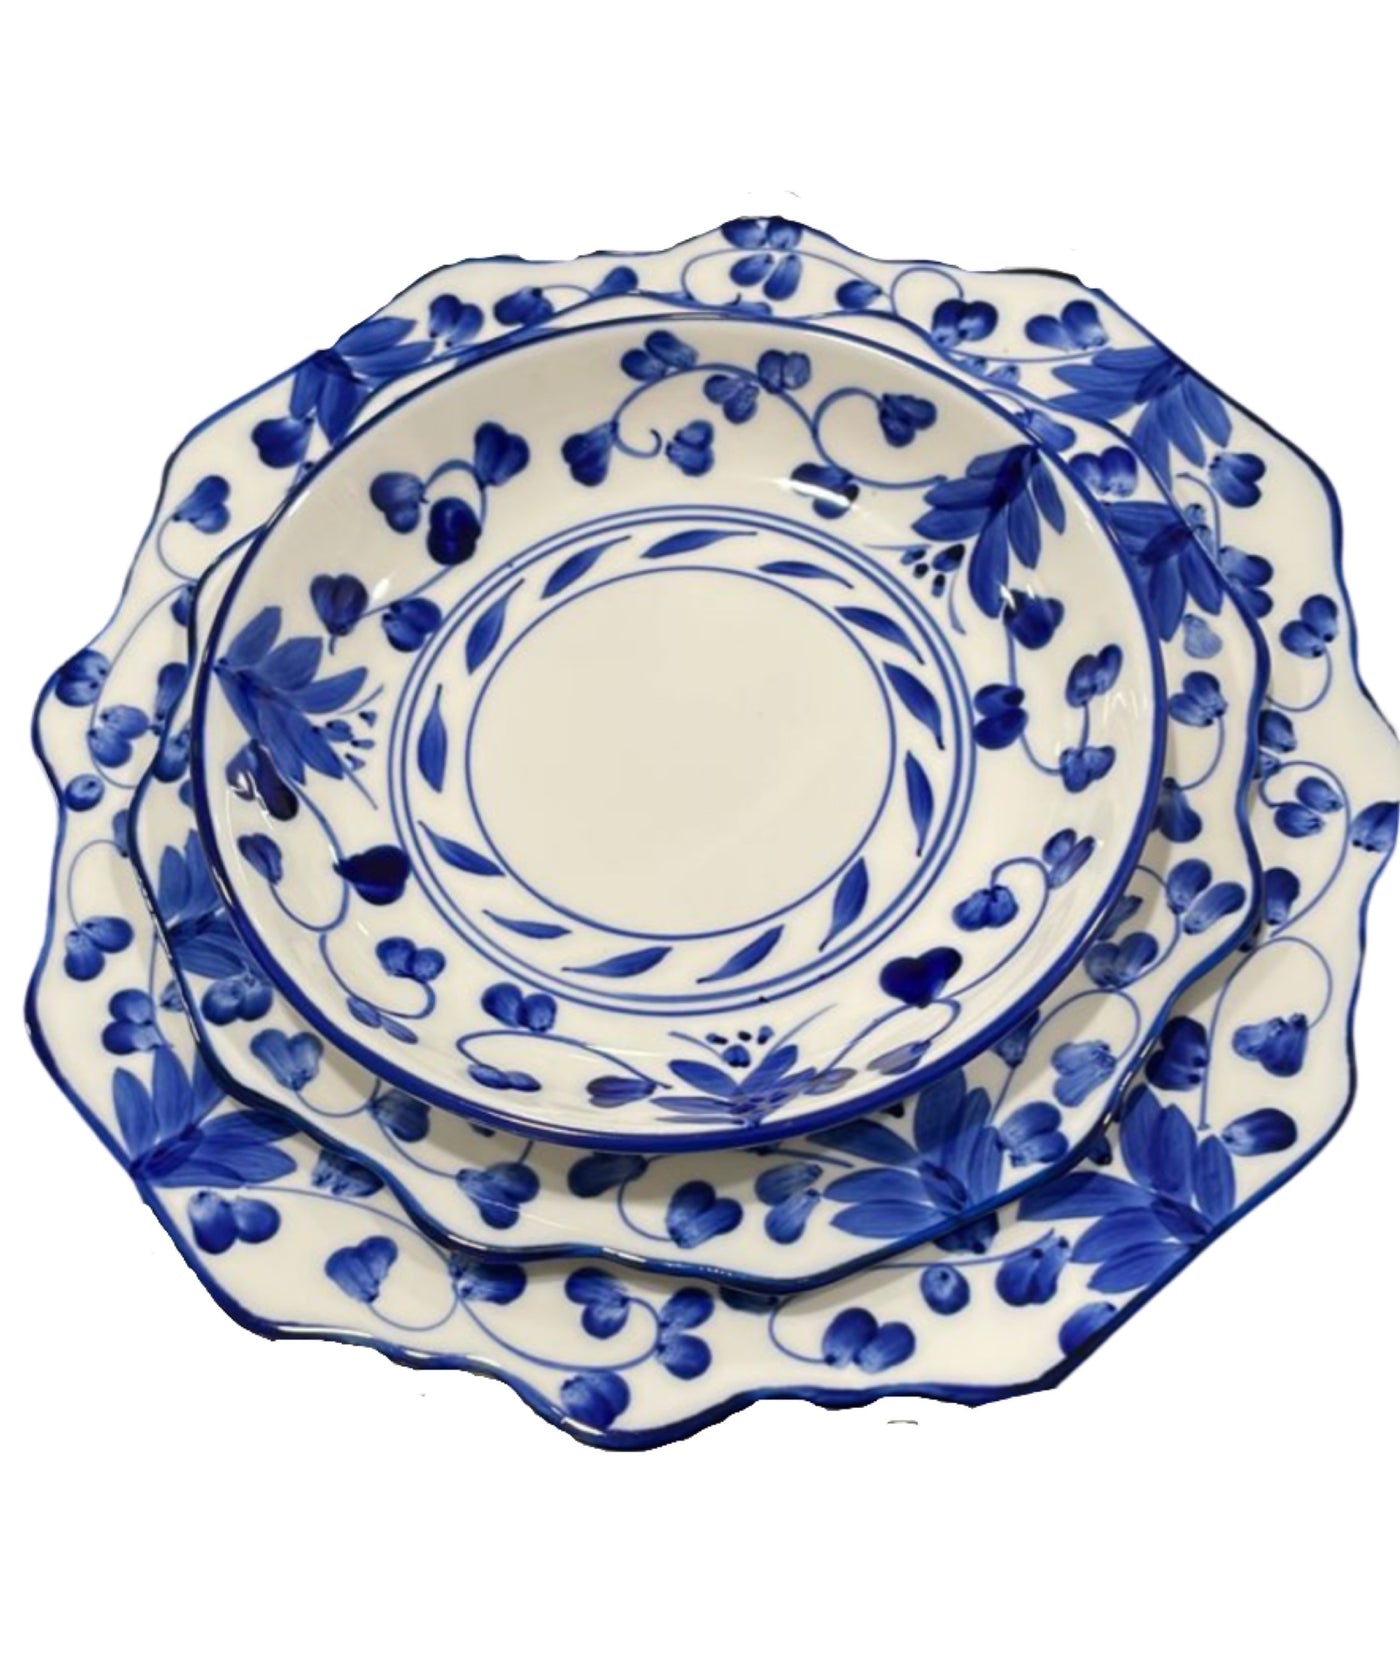 12pc (4 Person) 'Lily' Dinner Set - Blue